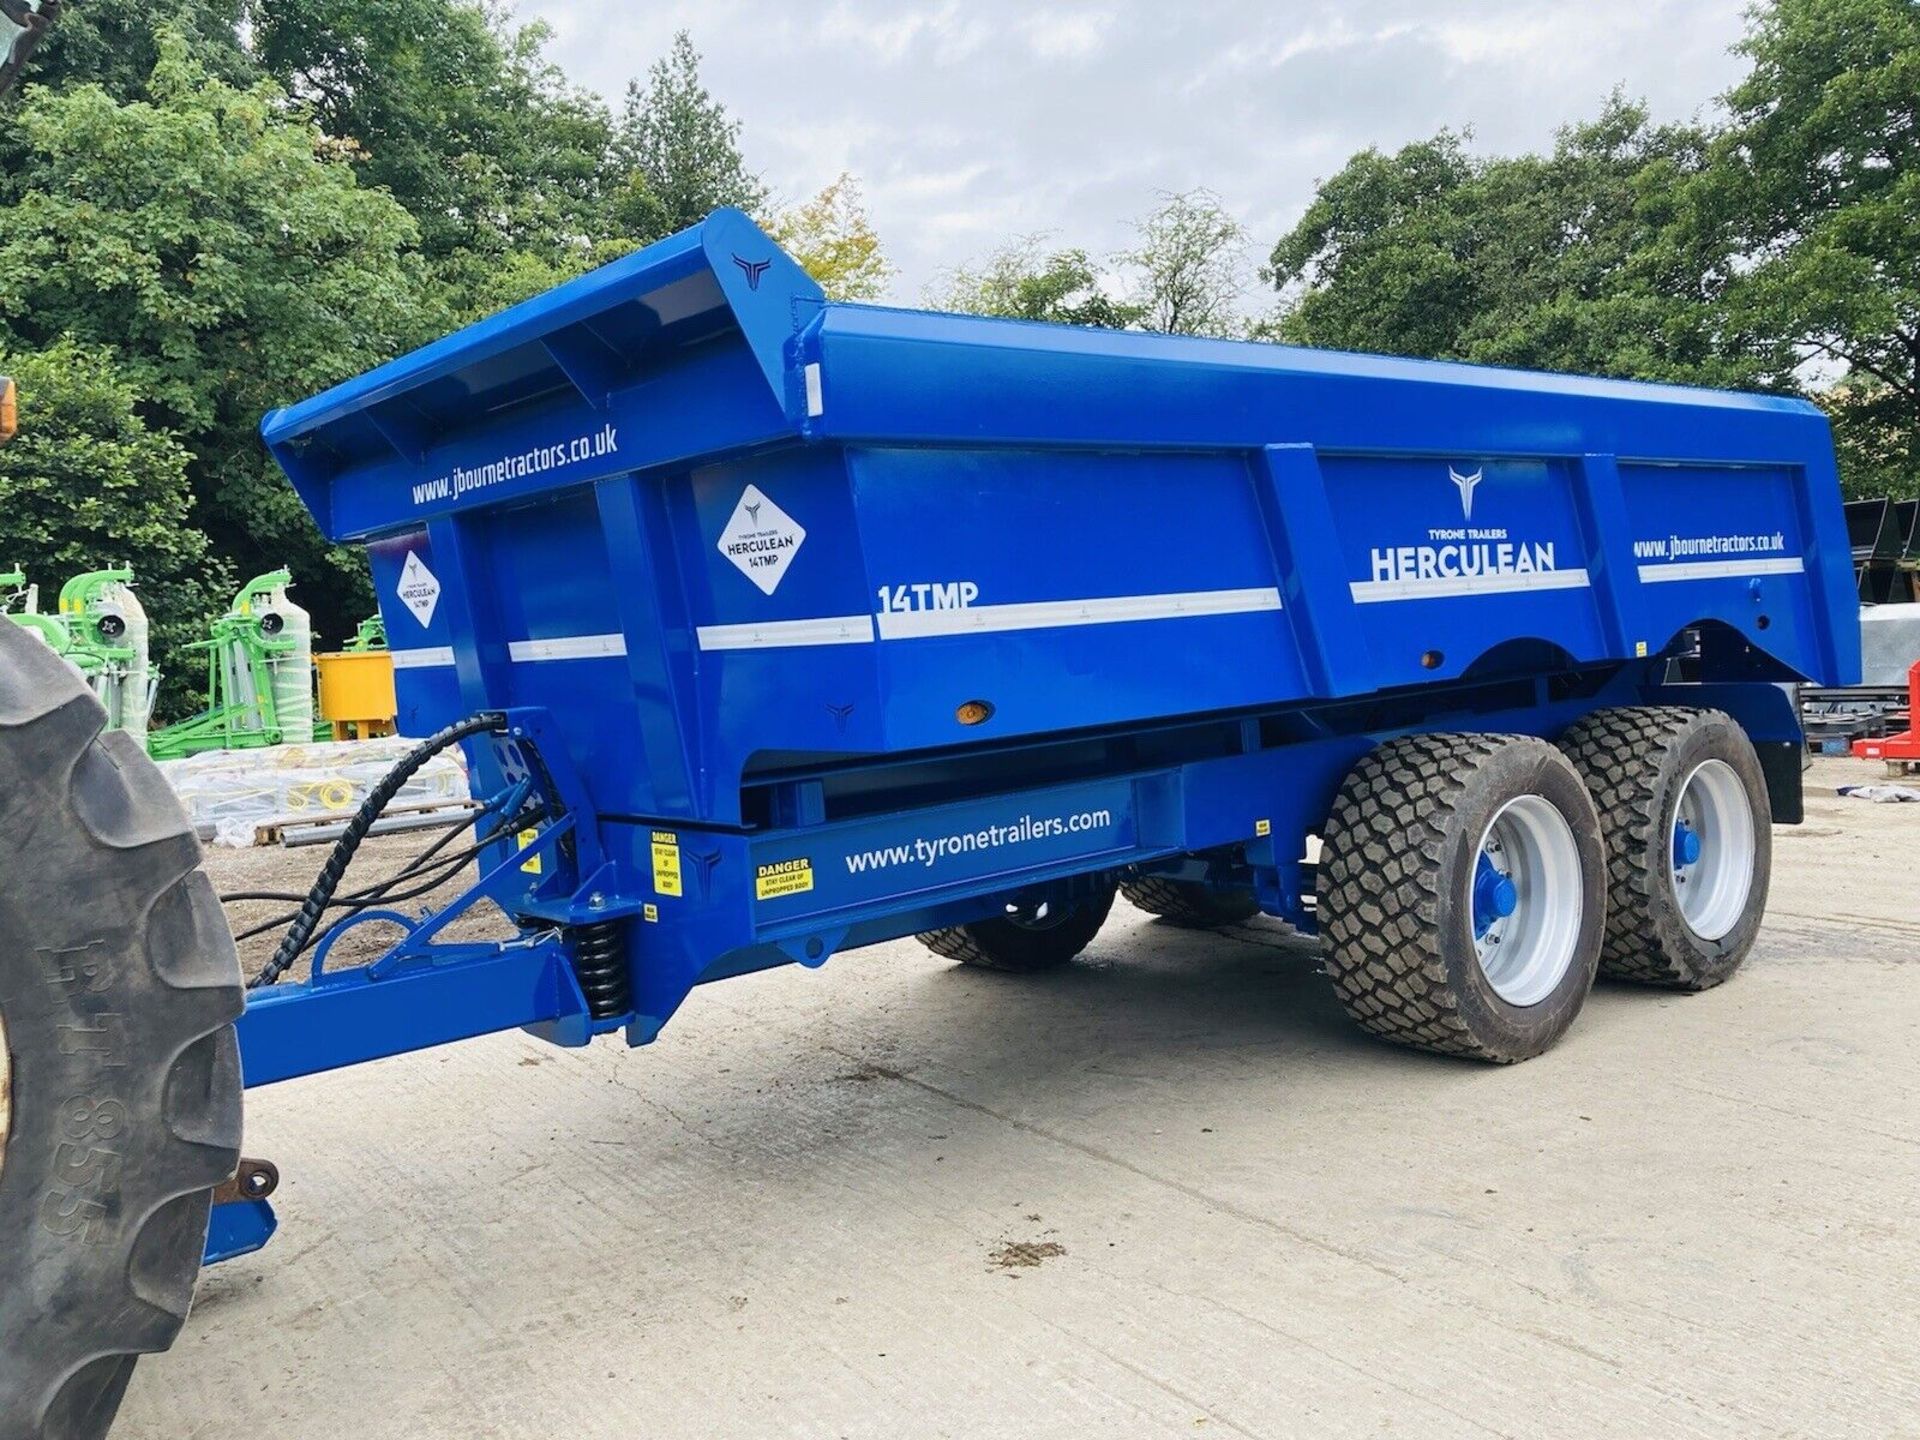 DUMPING PRECISION: TYRONE TRAILERS - 10MM FLOOR, 8MM SIDES, COMMERCIAL AXLES